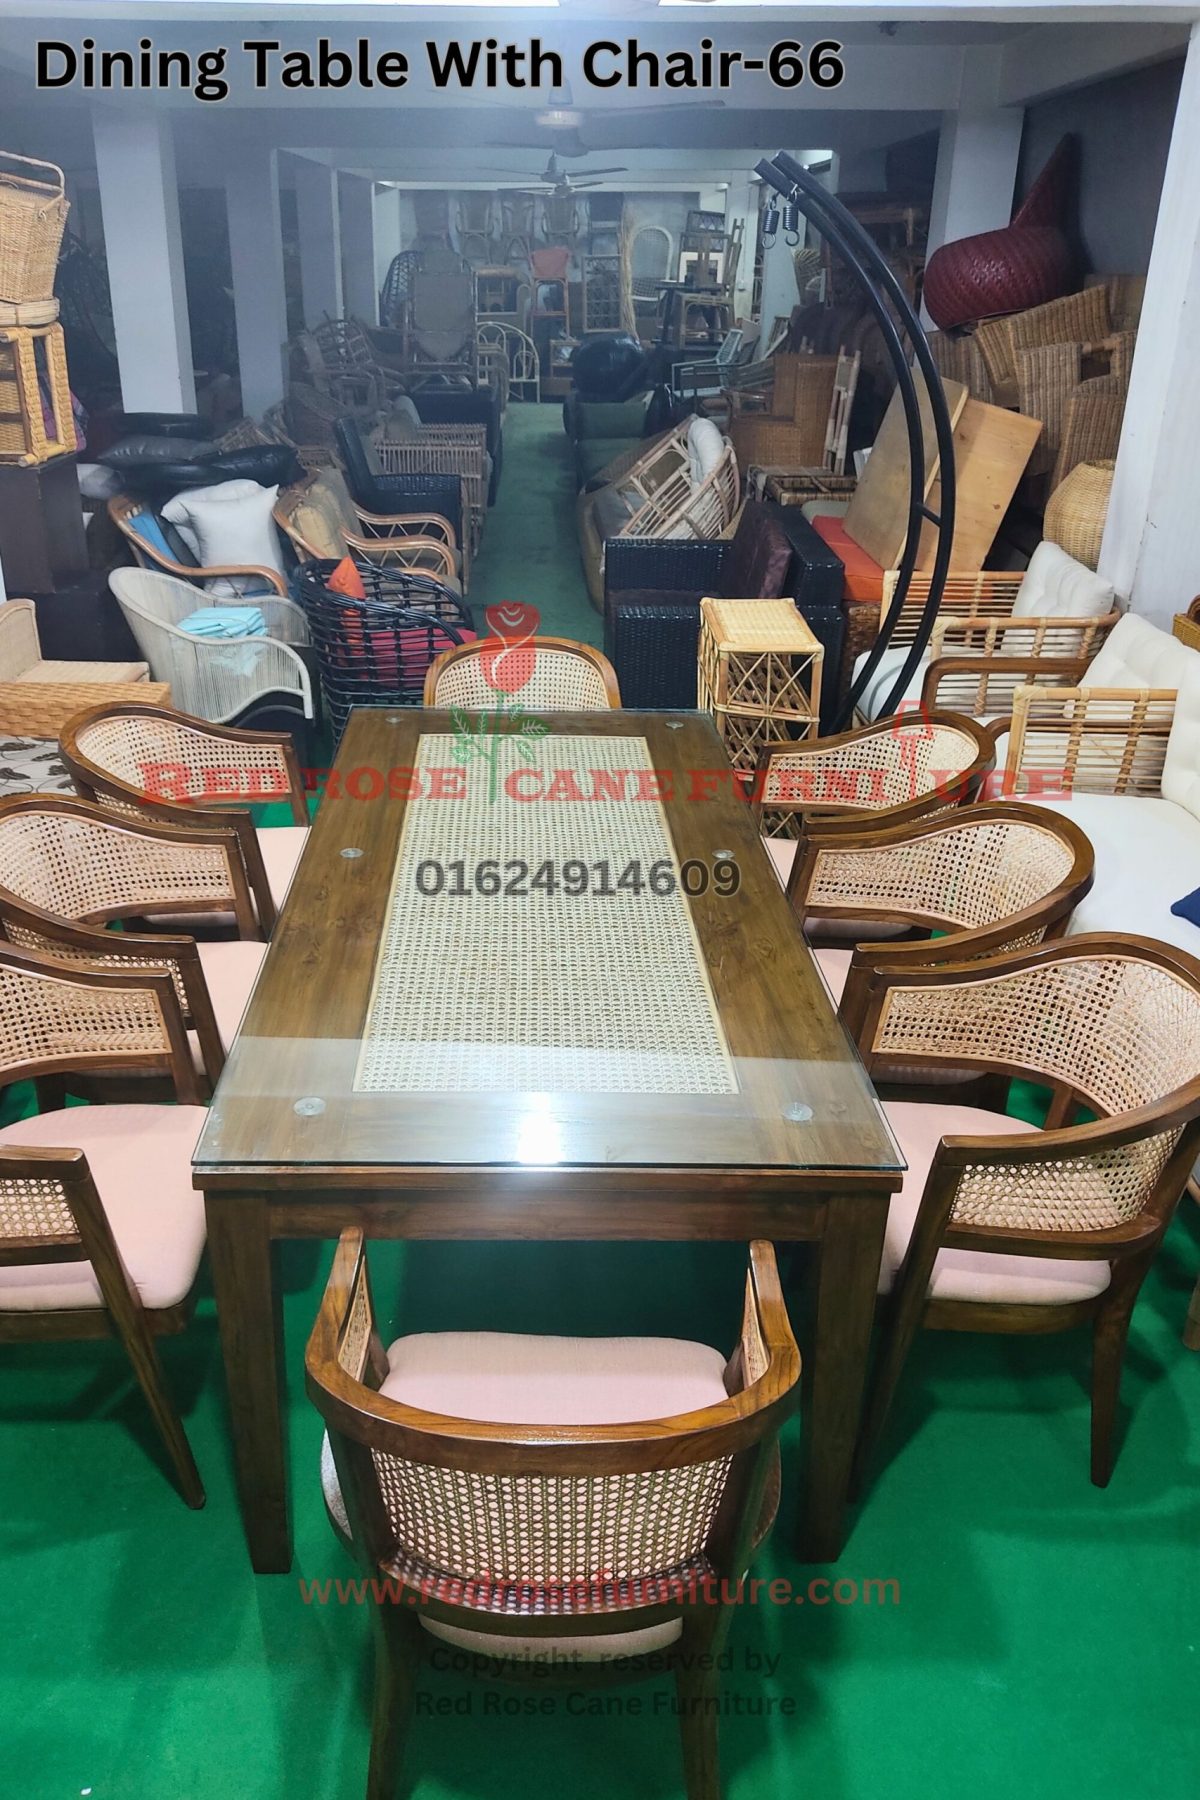 Dining Table With Chair-66